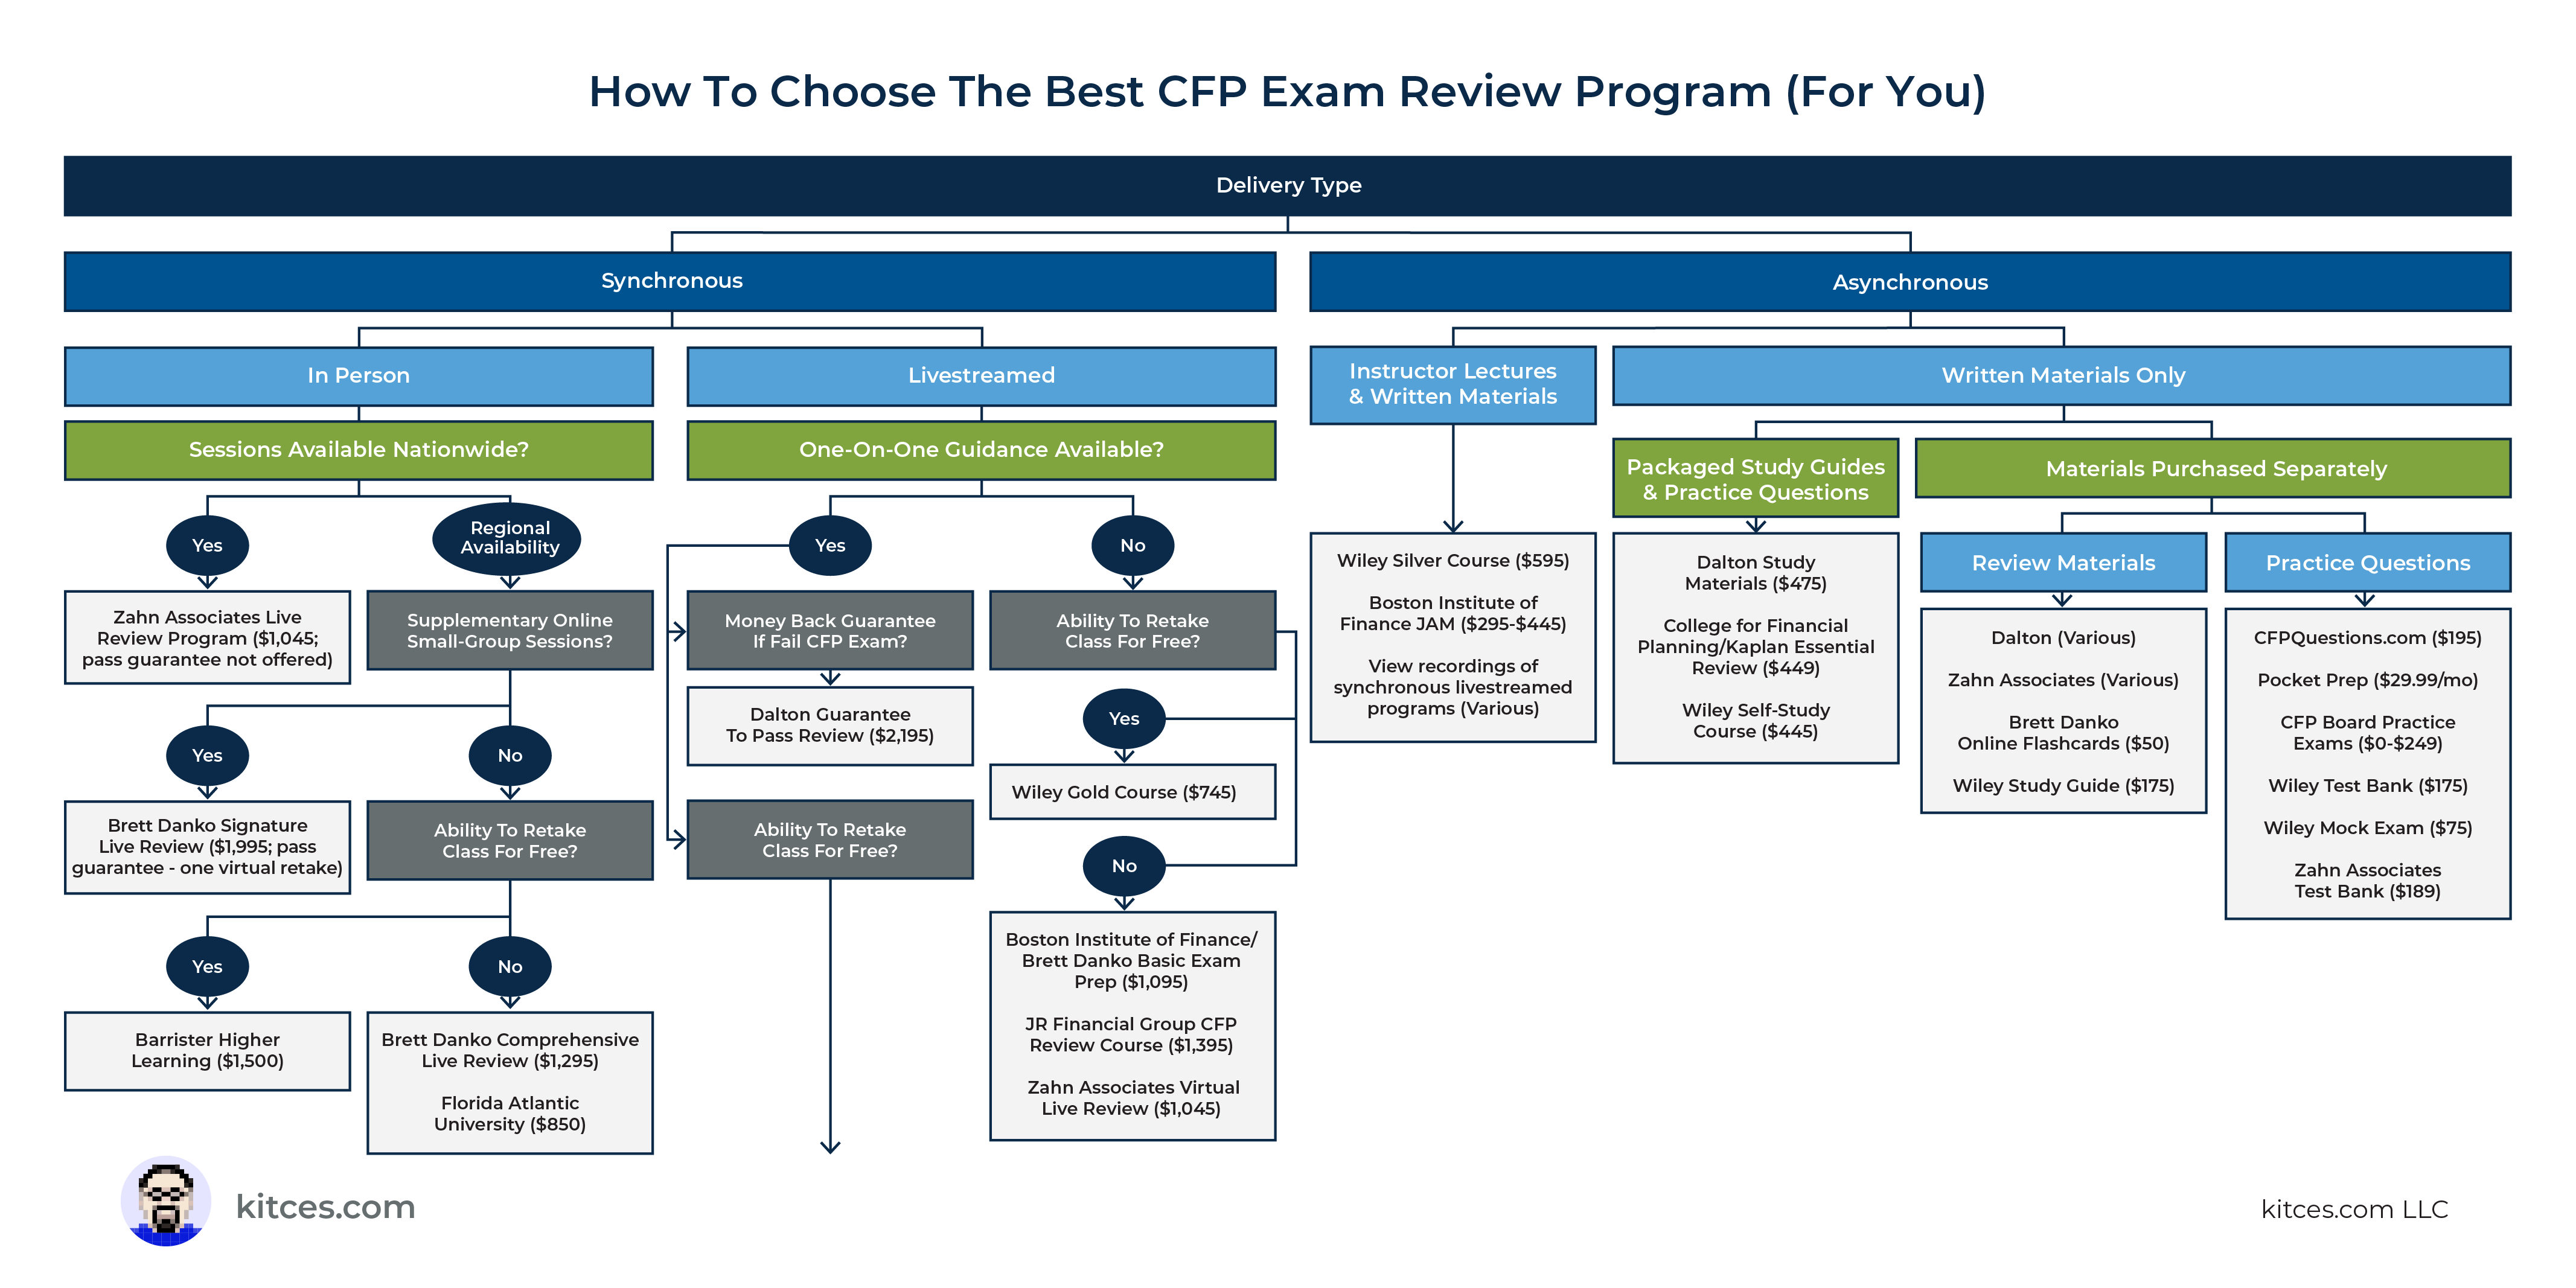 How To Choose The Best CFP Exam Review Program (For You)